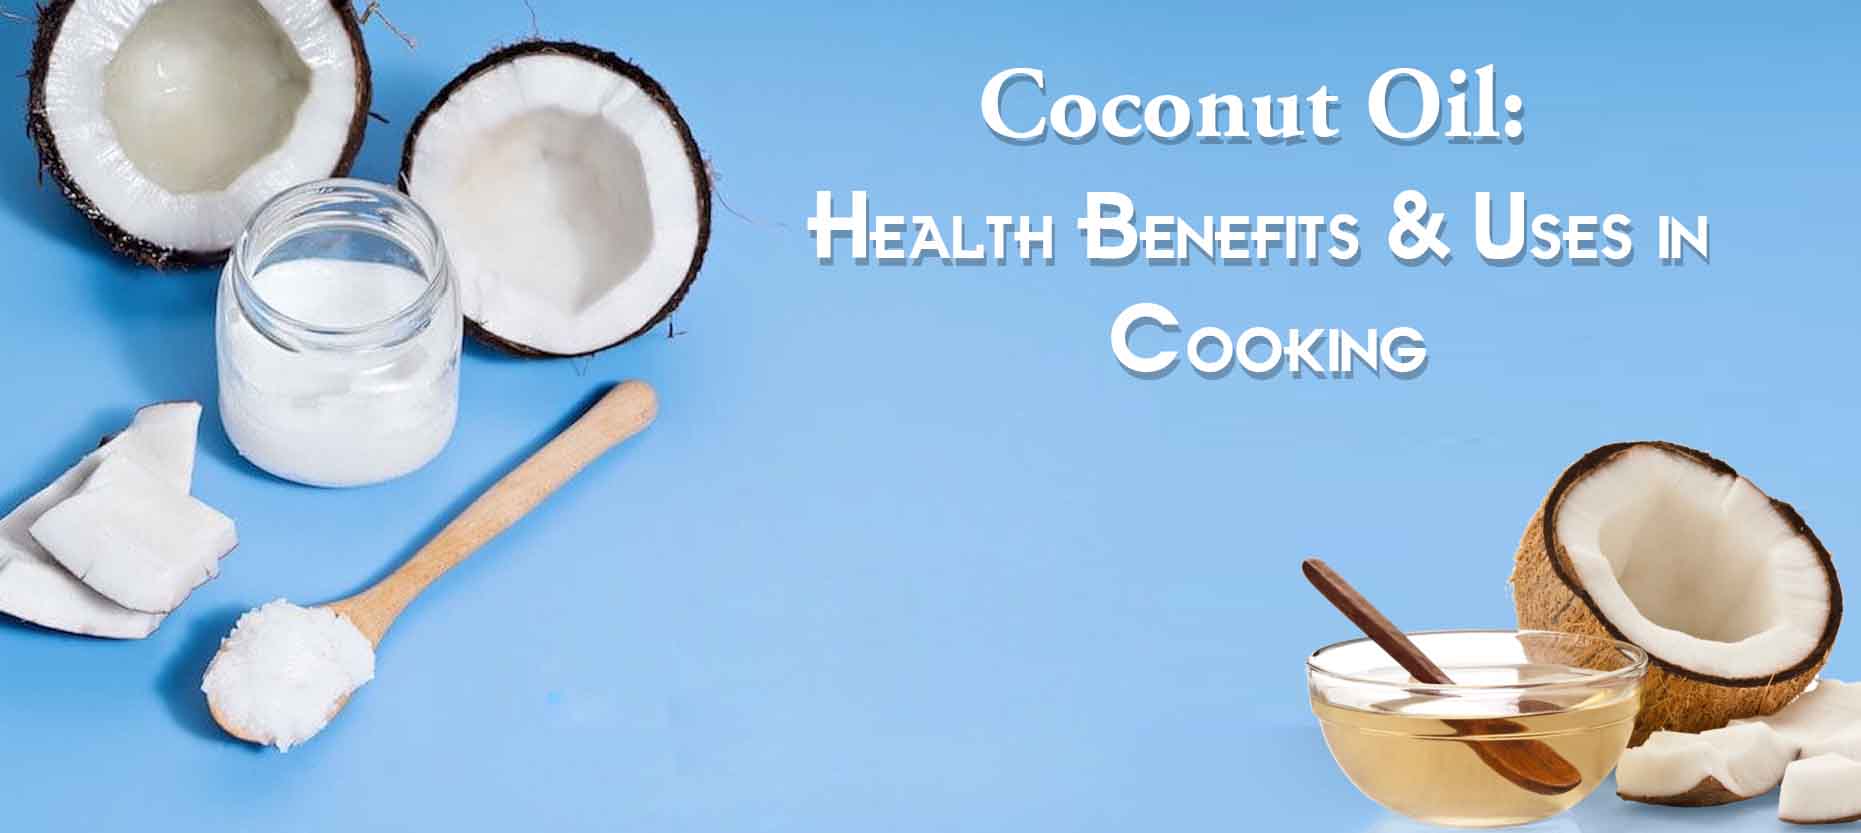 Coconut Oil: Health Benefits in Cooking